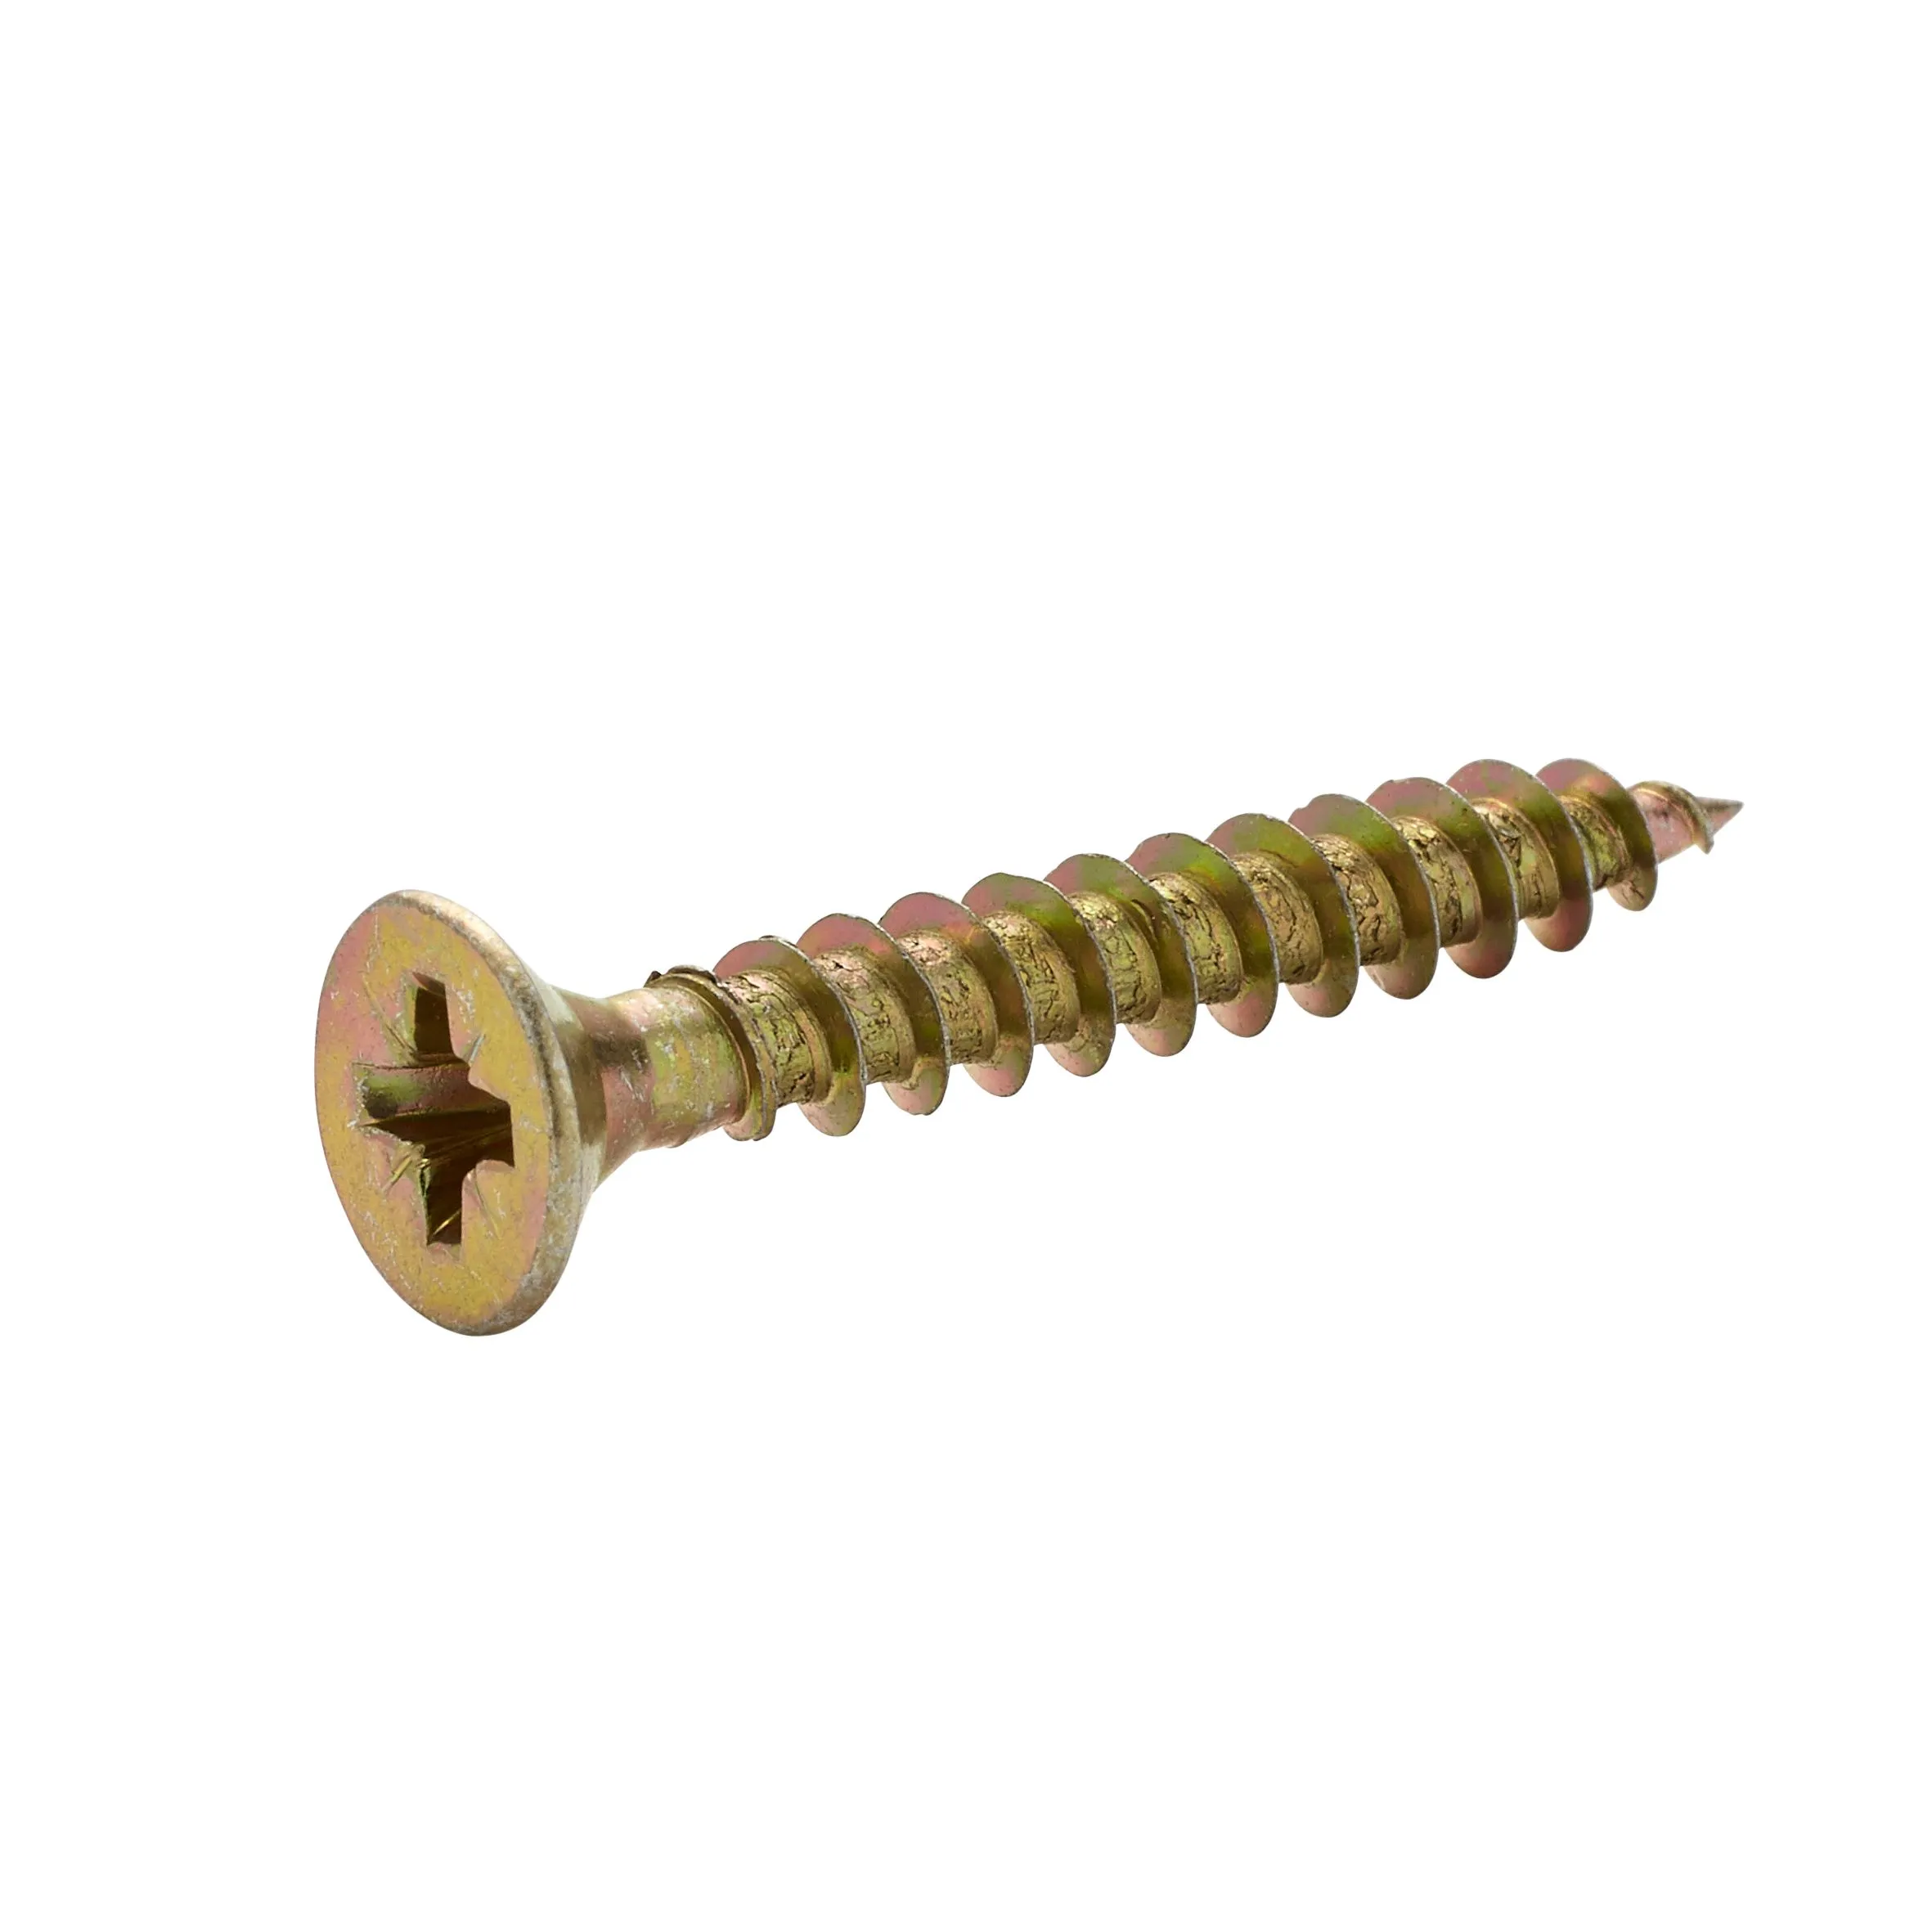 Diall PZ Double-countersunk Yellow-passivated Steel Wood screw (Dia)4mm (L)30mm, Pack of 100